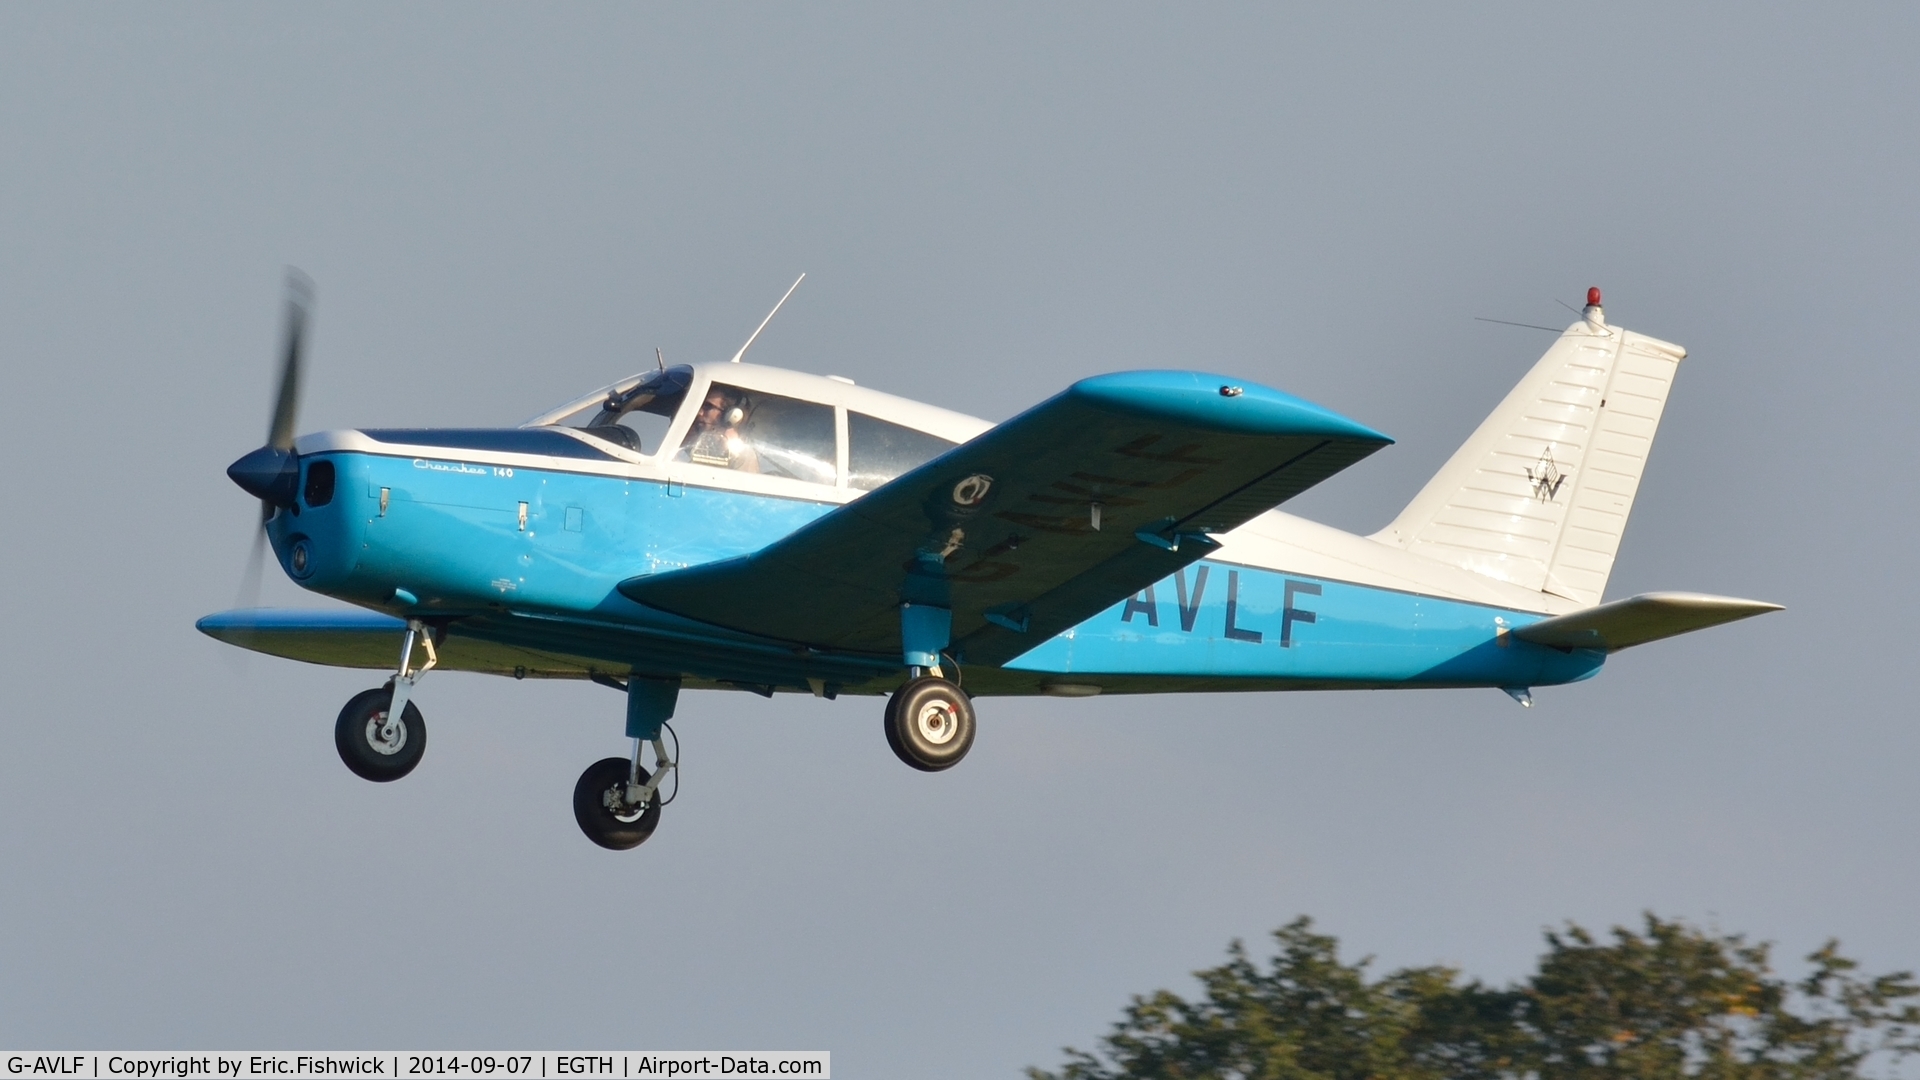 G-AVLF, 1967 Piper PA-28-140 Cherokee C/N 28-23268, 43. G-AVLF departing Shuttleworth Pagent Airshow, Sep. 2014.